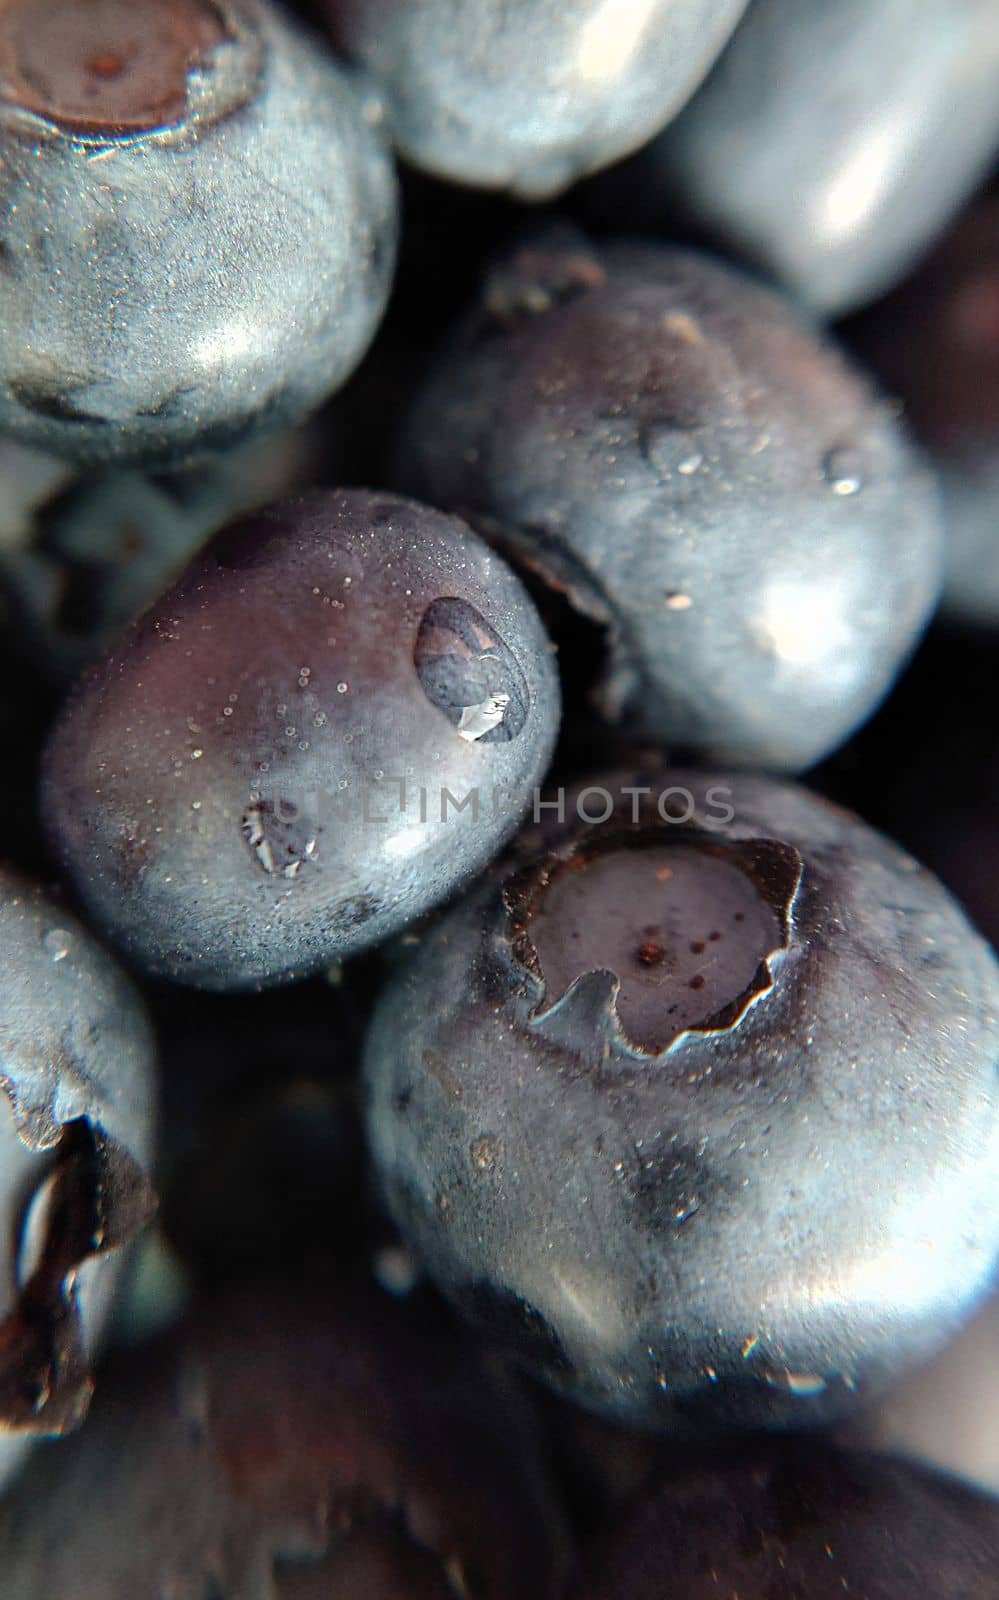 Garden large blueberries with a drop of water on the surface by Mastak80